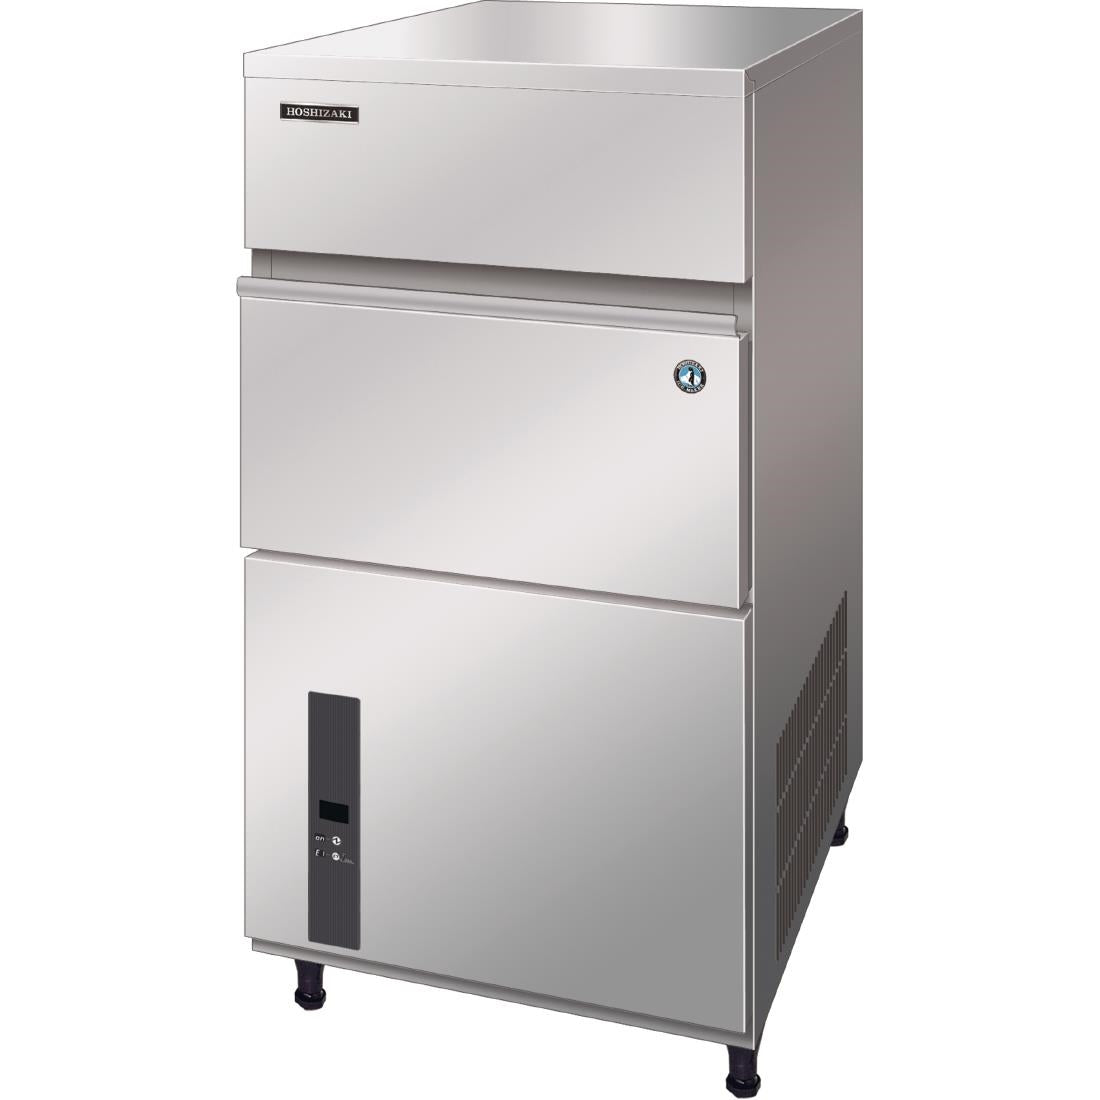 DE916-L Hoshizaki Water Cooled Ice Maker IM-100WNE Large Ice Cubes JD Catering Equipment Solutions Ltd